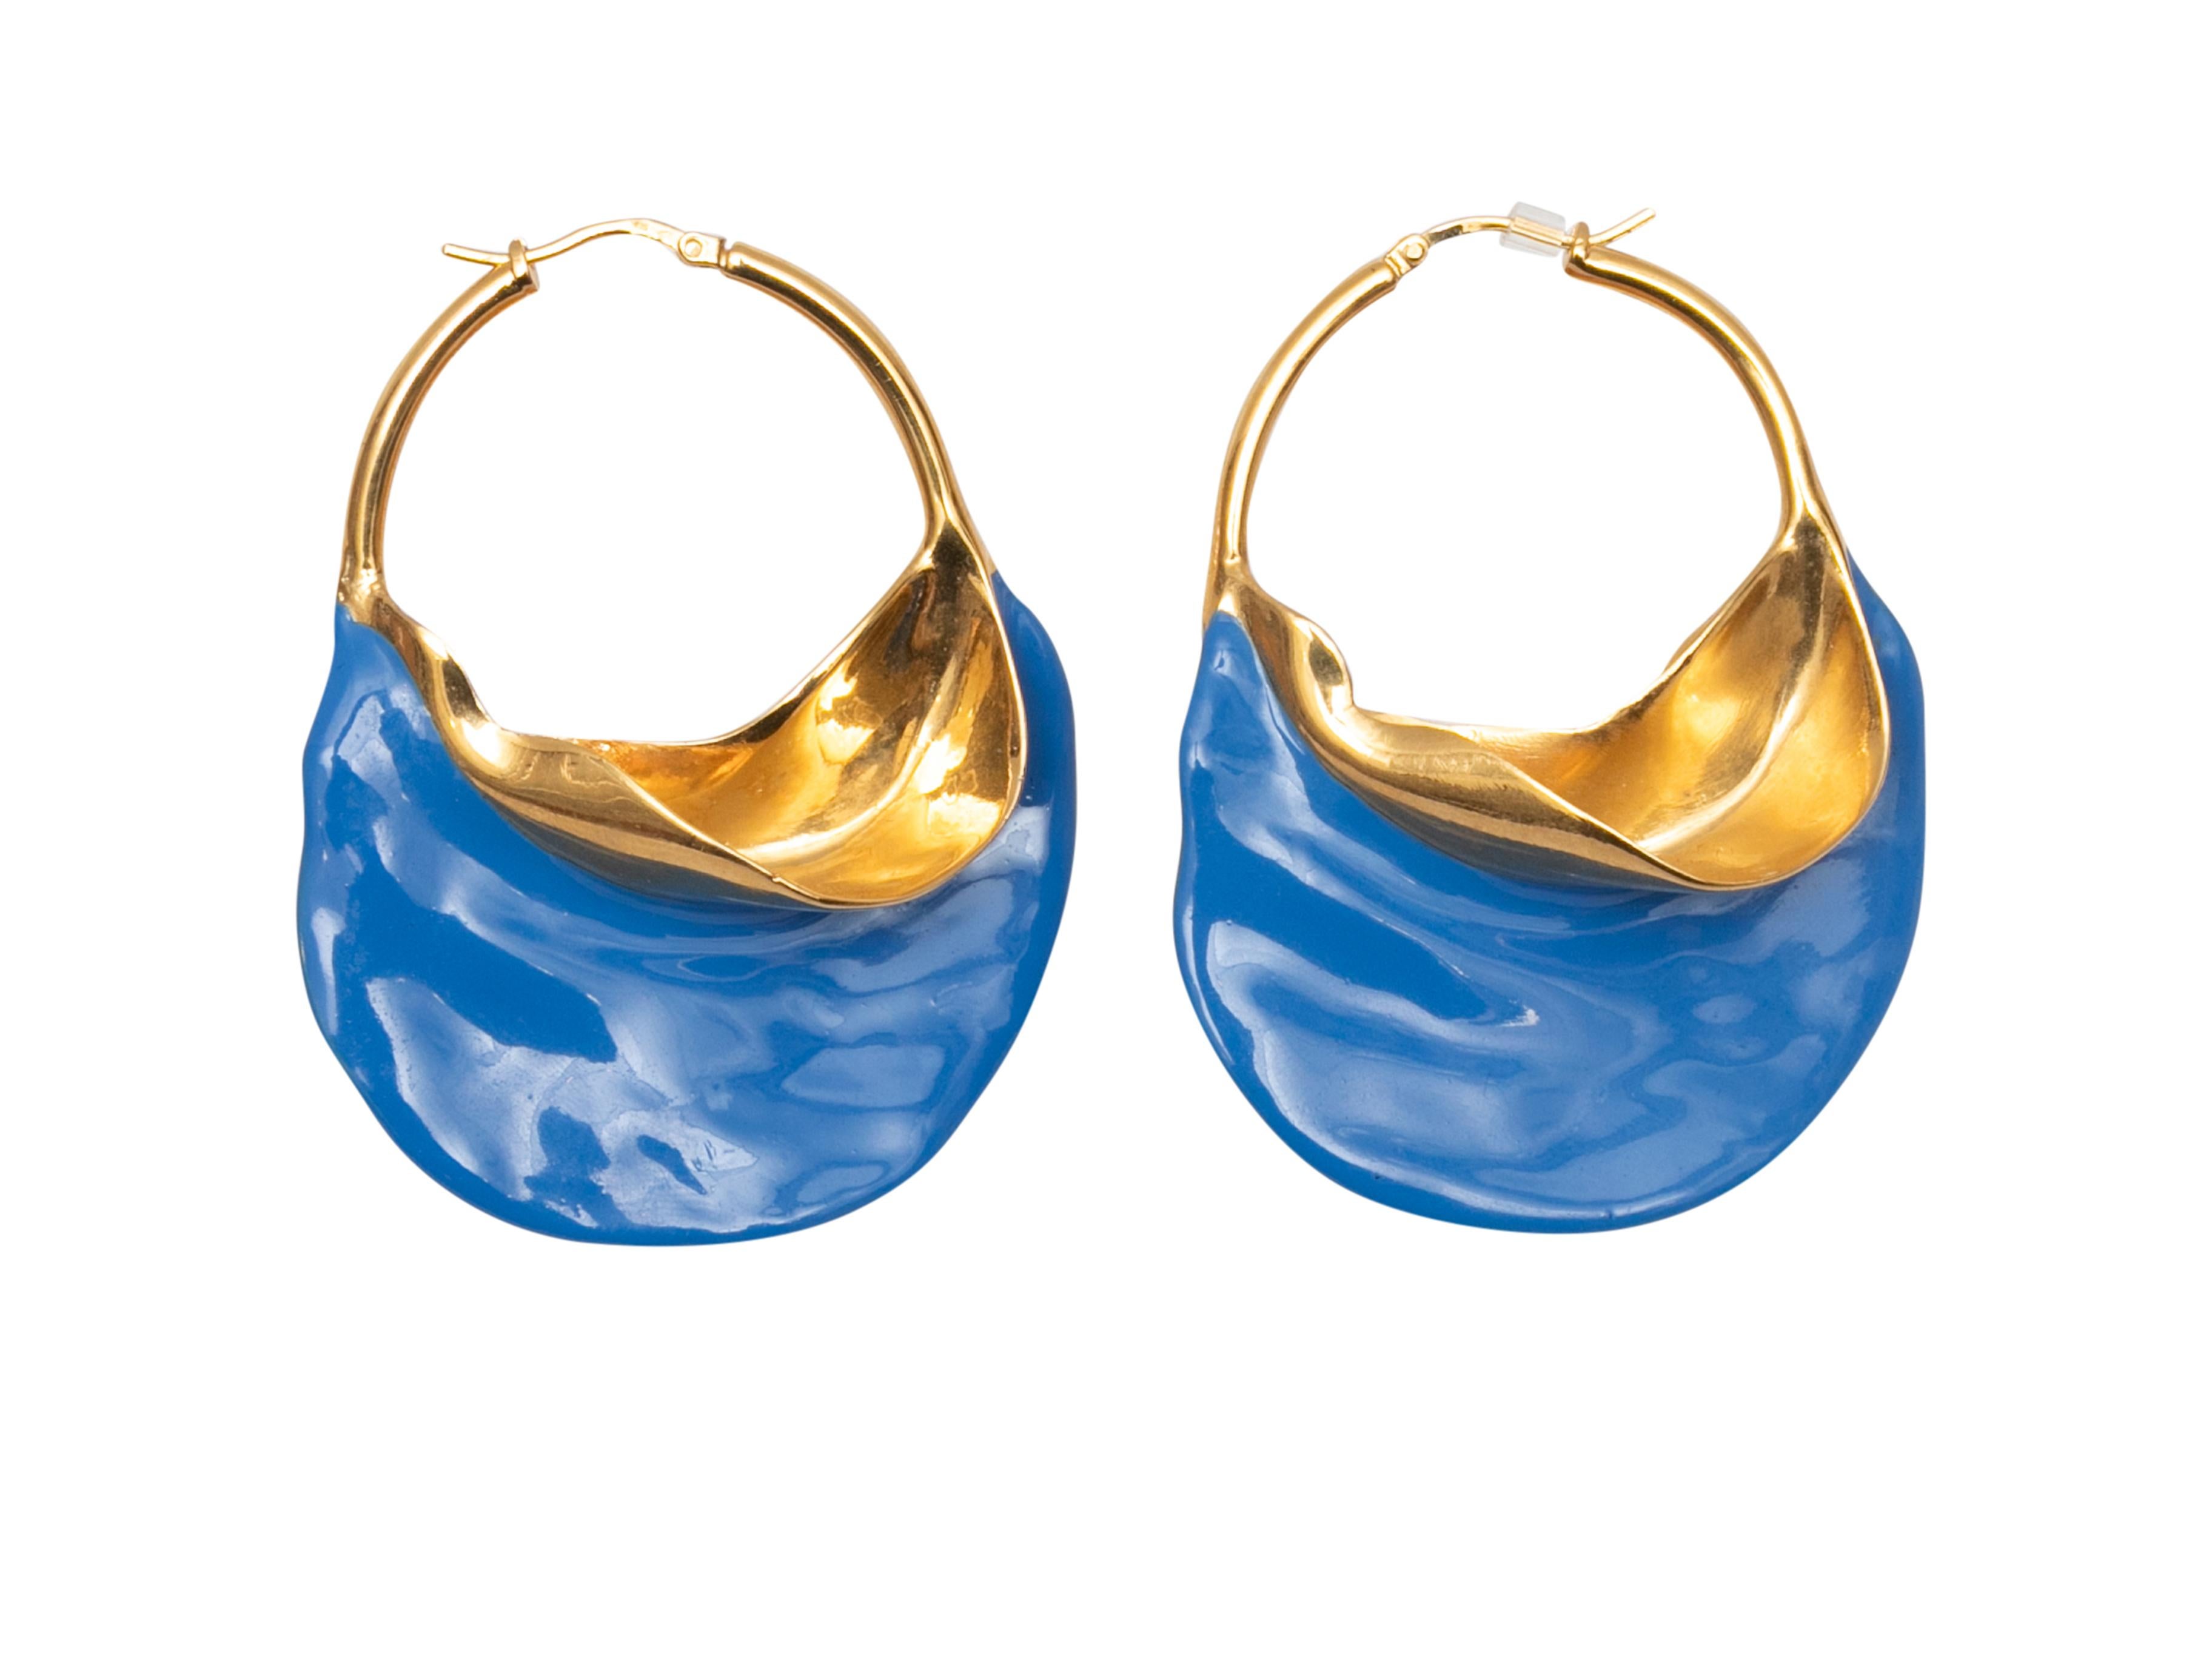 Blue and gold-tone hoop earrings by Celine. From the Phoebe Philo Era. Hinged closures. 2.5